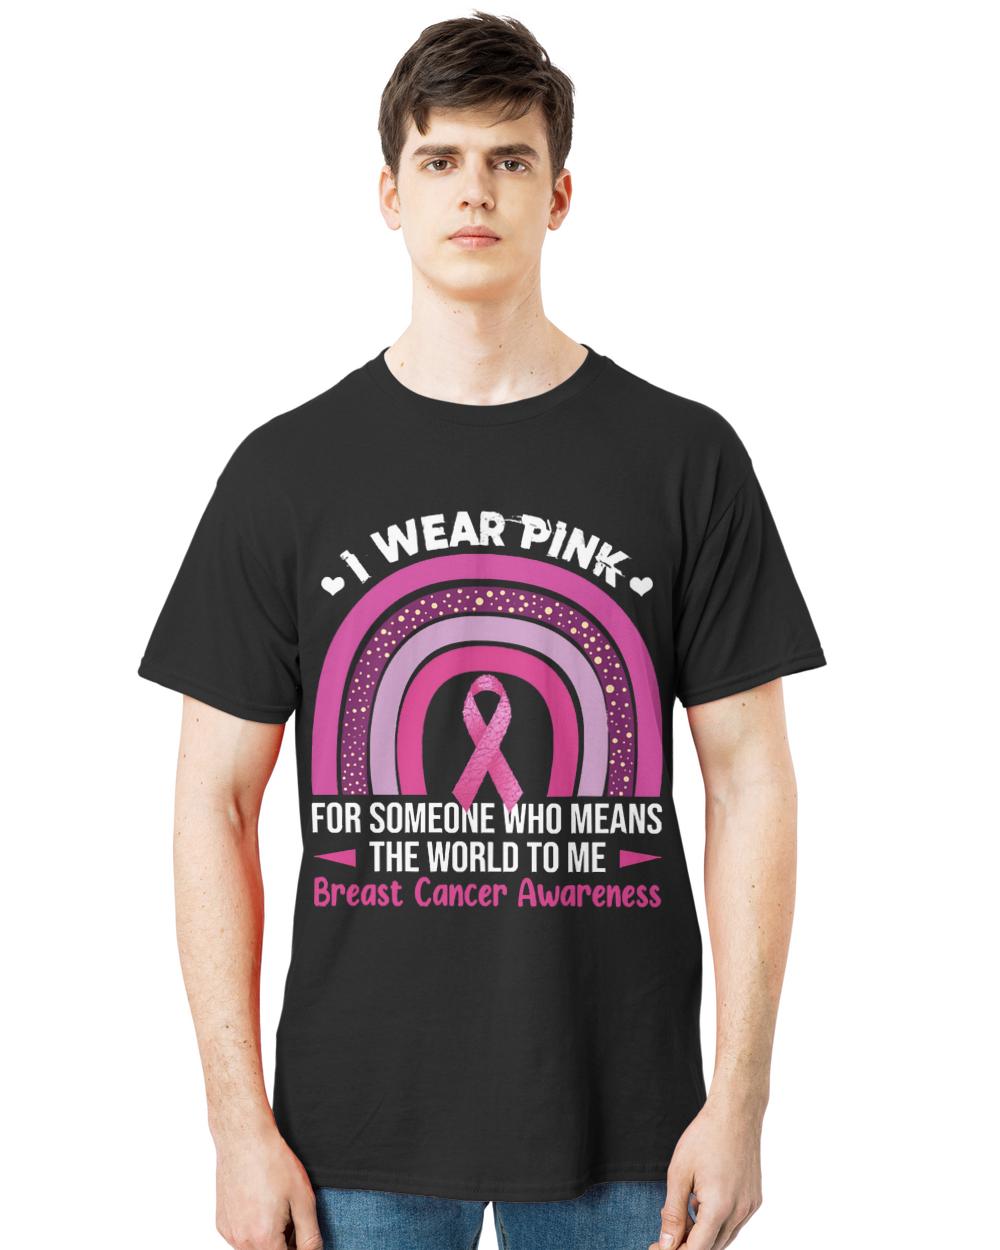 Wear Pink For Who Means The World To Me T- Shirt Breast Cancer Awareness Wear Pink For Someone Who Meas The World To Me T- Shirt